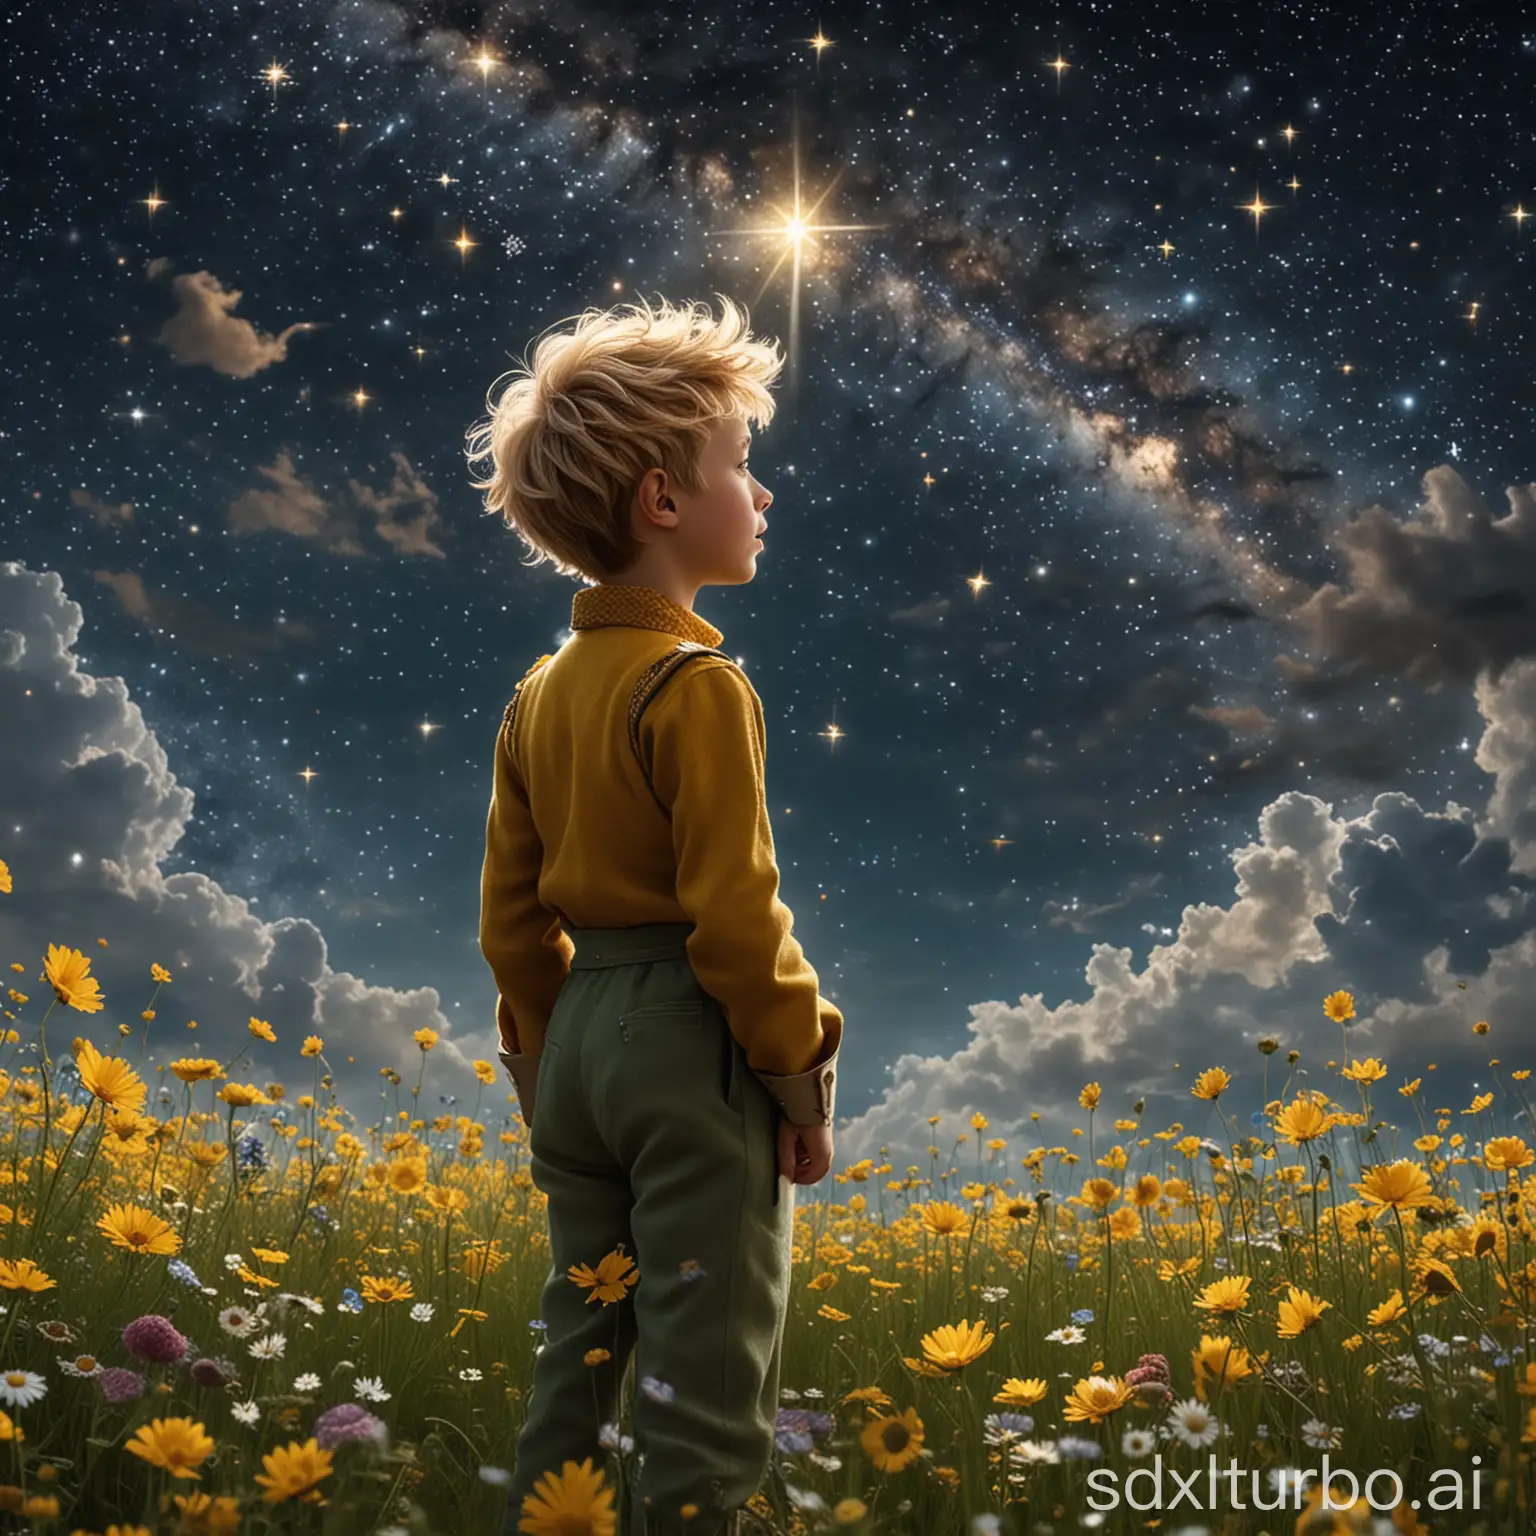 Guardian-of-the-Bright-Star-Little-Prince-Protects-His-Beloved-Flower-in-the-Sky